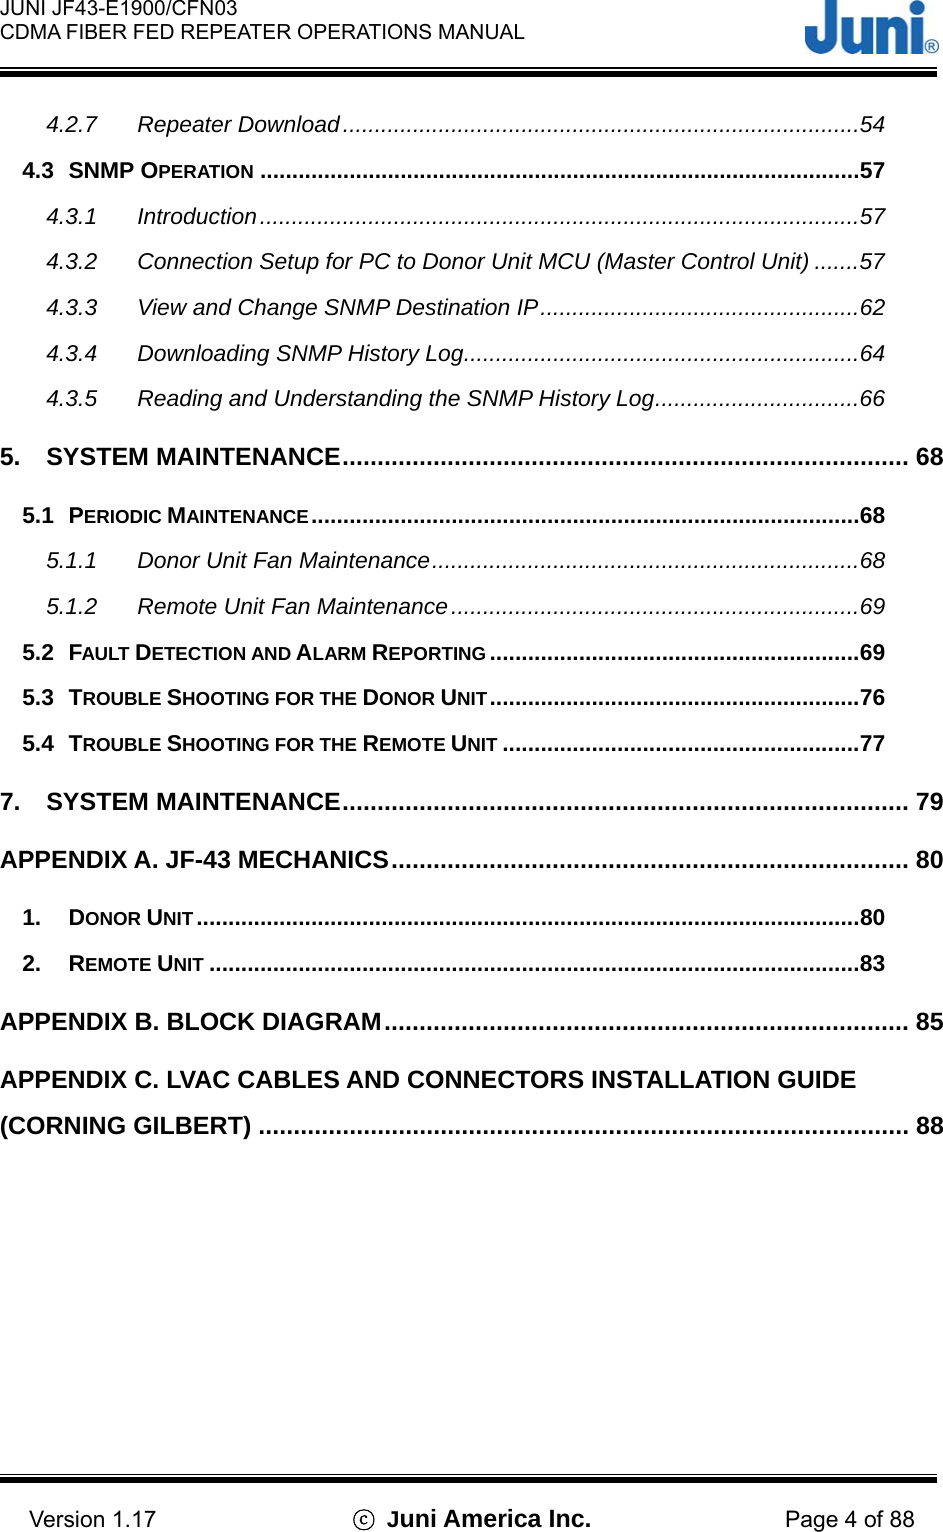  JUNI JF43-E1900/CFN03 CDMA FIBER FED REPEATER OPERATIONS MANUAL                                    Version 1.17  ⓒ Juni America Inc. Page 4 of 88 4.2.7 Repeater Download.................................................................................54 4.3 SNMP OPERATION ..............................................................................................57 4.3.1 Introduction..............................................................................................57 4.3.2 Connection Setup for PC to Donor Unit MCU (Master Control Unit) .......57 4.3.3 View and Change SNMP Destination IP..................................................62 4.3.4 Downloading SNMP History Log..............................................................64 4.3.5 Reading and Understanding the SNMP History Log................................66 5. SYSTEM MAINTENANCE................................................................................. 68 5.1 PERIODIC MAINTENANCE......................................................................................68 5.1.1 Donor Unit Fan Maintenance...................................................................68 5.1.2 Remote Unit Fan Maintenance................................................................69 5.2 FAULT DETECTION AND ALARM REPORTING ..........................................................69 5.3 TROUBLE SHOOTING FOR THE DONOR UNIT..........................................................76 5.4 TROUBLE SHOOTING FOR THE REMOTE UNIT ........................................................77 7. SYSTEM MAINTENANCE................................................................................. 79 APPENDIX A. JF-43 MECHANICS.......................................................................... 80 1. DONOR UNIT ........................................................................................................80 2. REMOTE UNIT ......................................................................................................83 APPENDIX B. BLOCK DIAGRAM........................................................................... 85 APPENDIX C. LVAC CABLES AND CONNECTORS INSTALLATION GUIDE (CORNING GILBERT) ............................................................................................. 88   